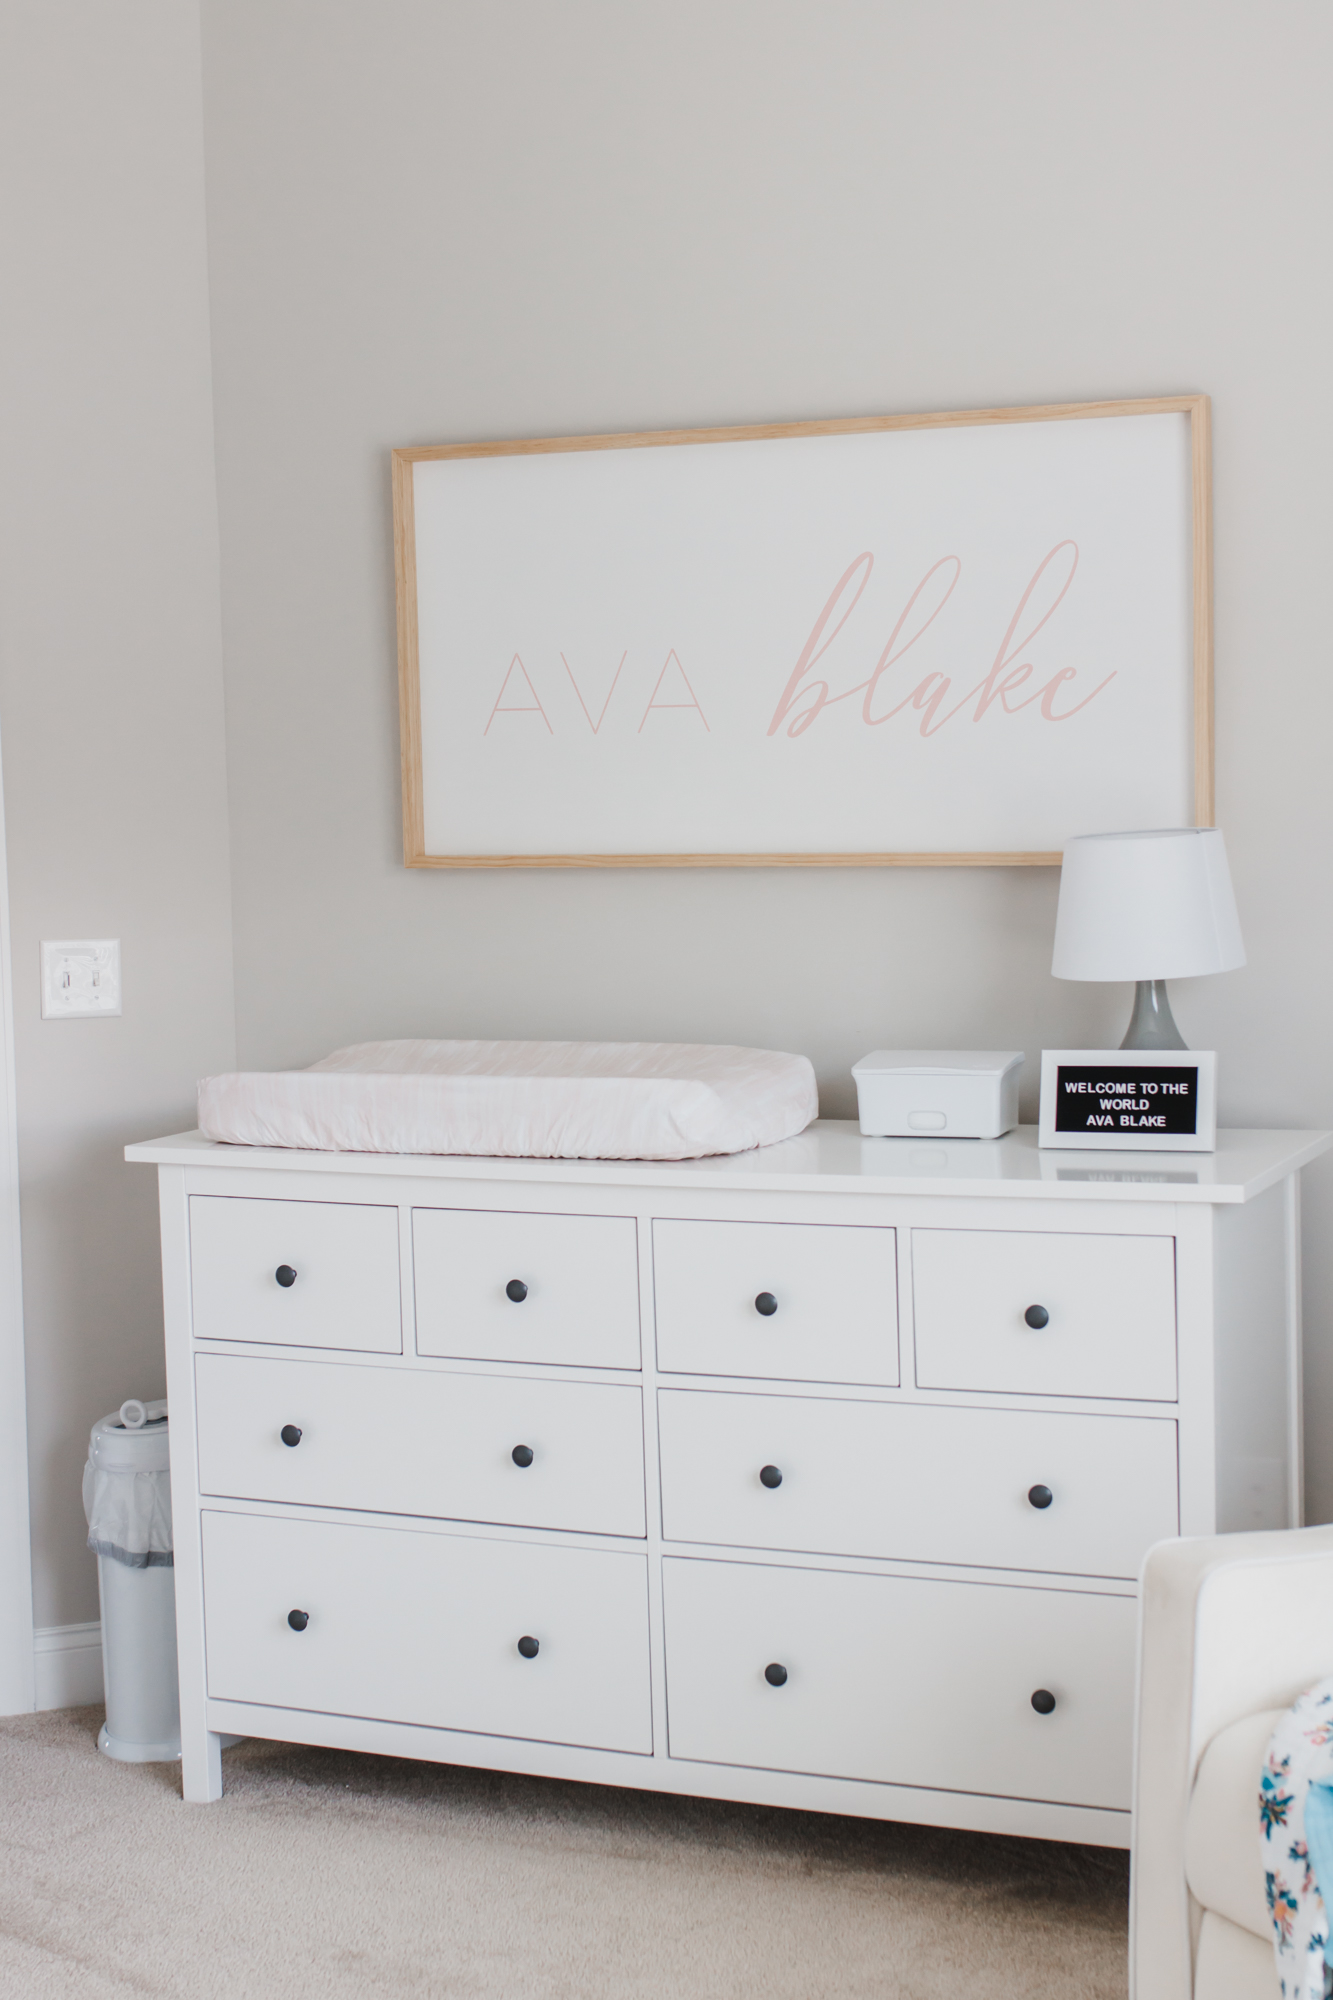 Step inside this gorgeous baby girl's nursery in soft blue and blush tones. Click through for the details. #nursery #babygirl #girlsroom #girlsnursery #girlnursery #girlroom #baby #newbaby | glitterinc.com | @glitterinc